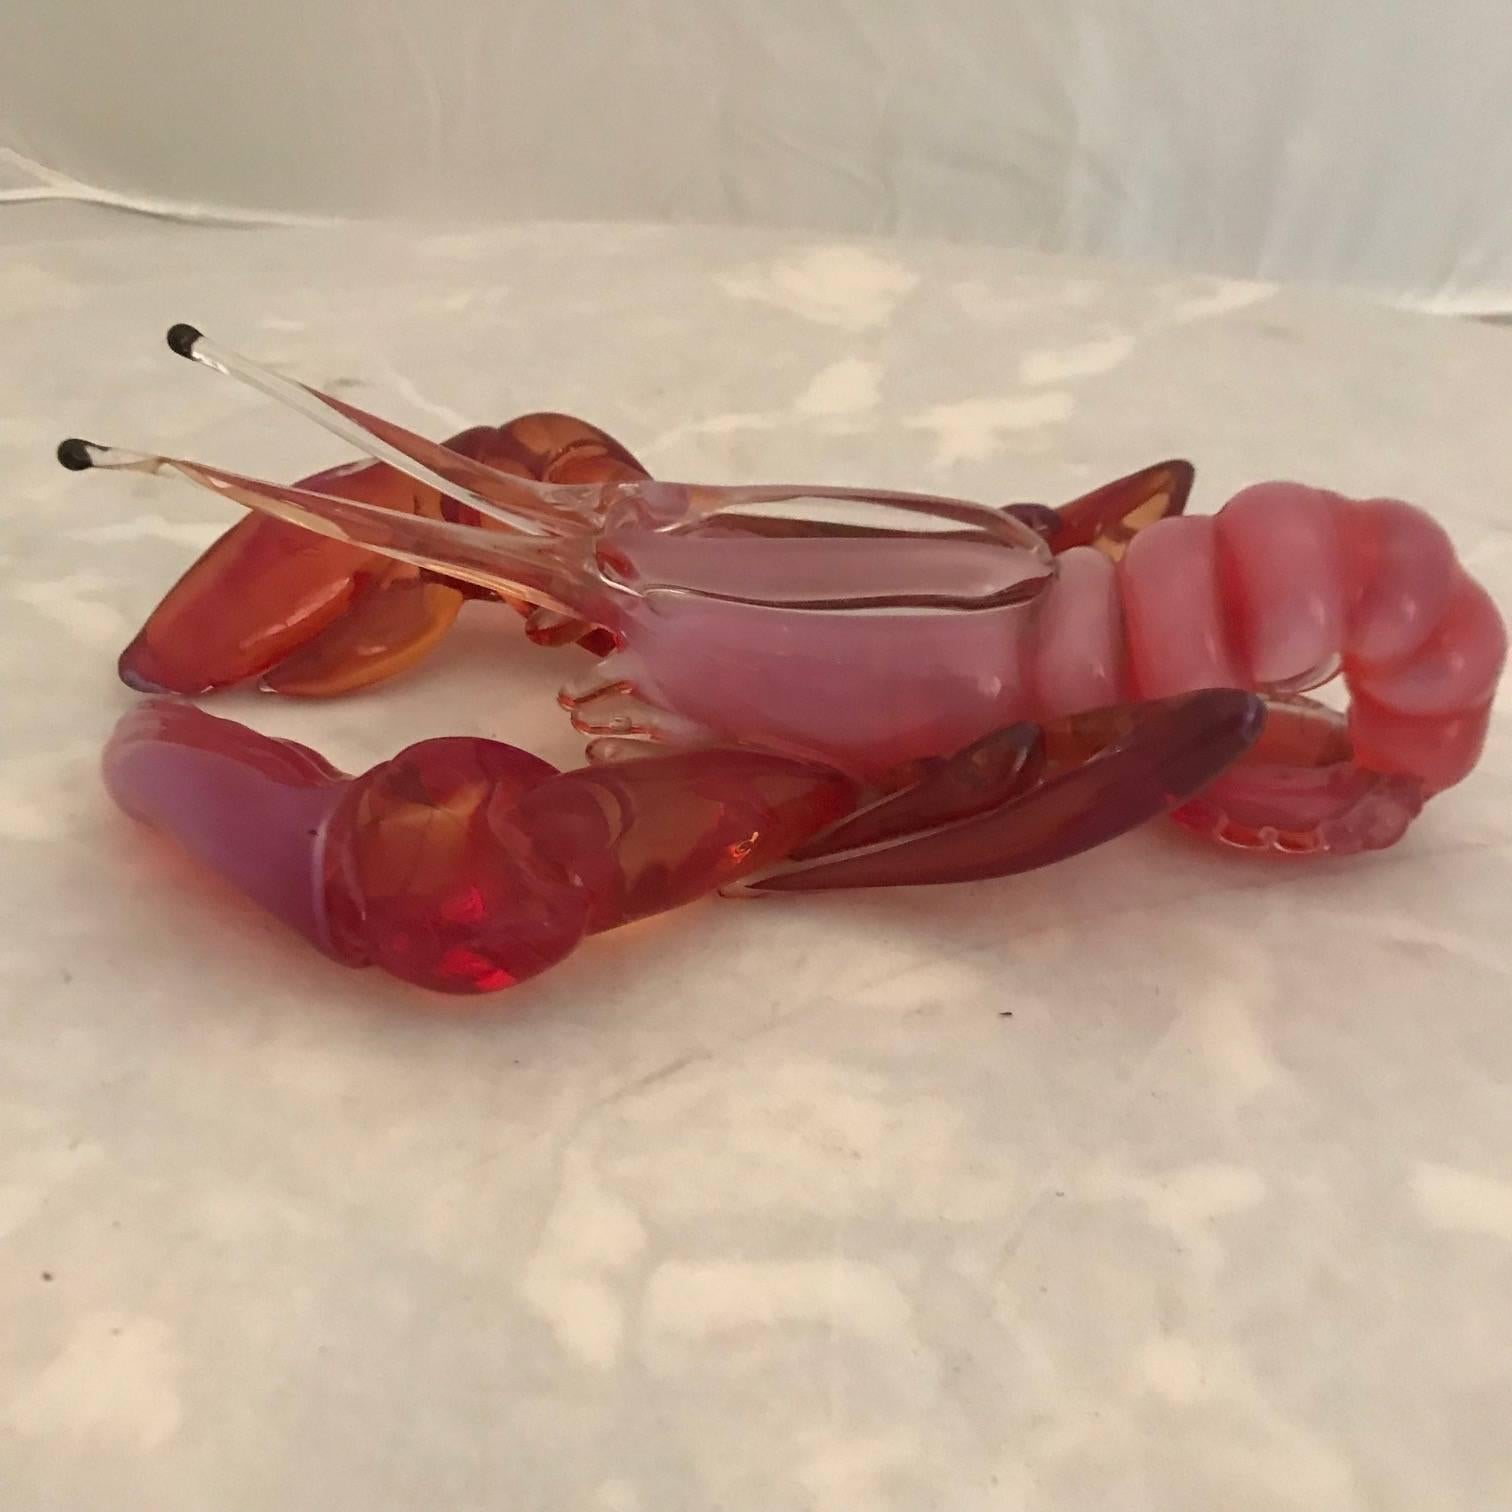 Finest quality Murano glass sculpture of the lobster, Italian, 1960s.